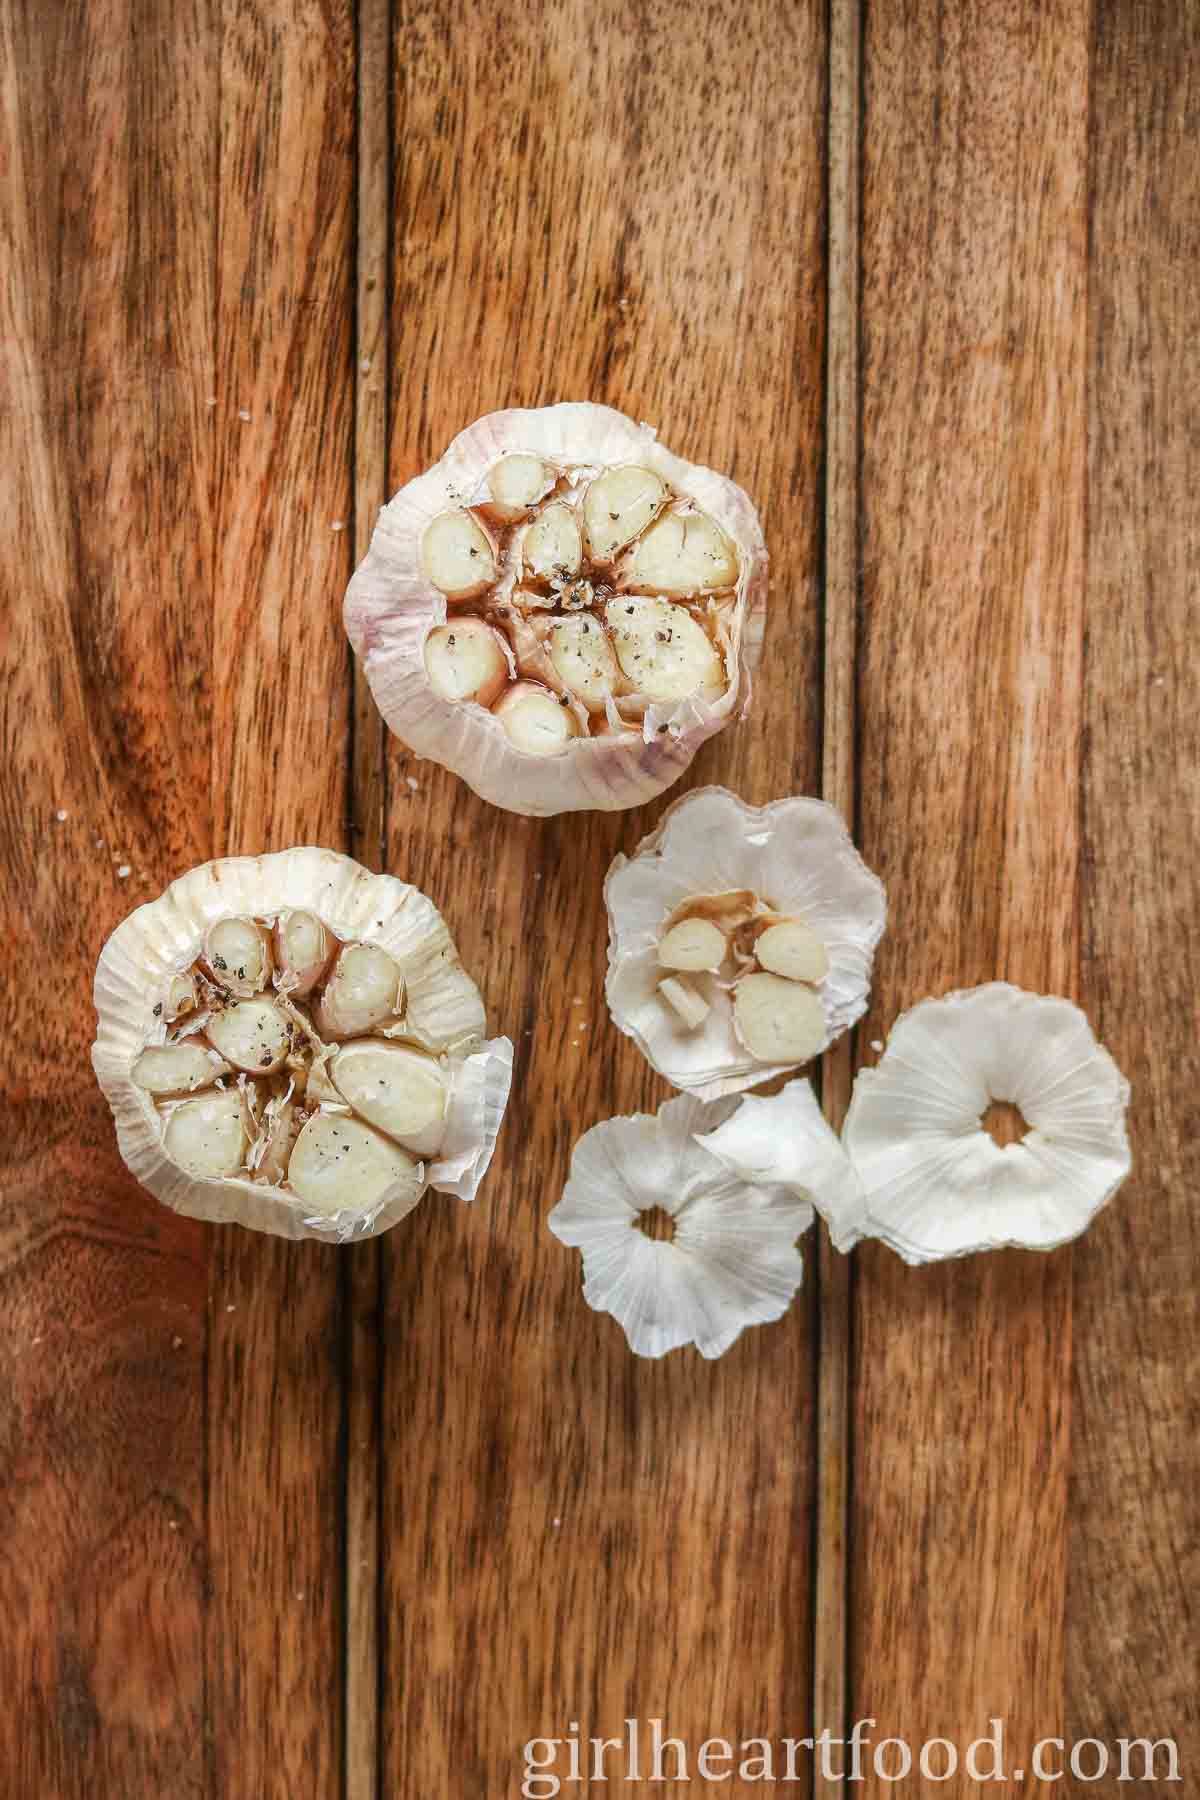 Two bulbs of garlic with the tops cut off, exposing the cloves inside.